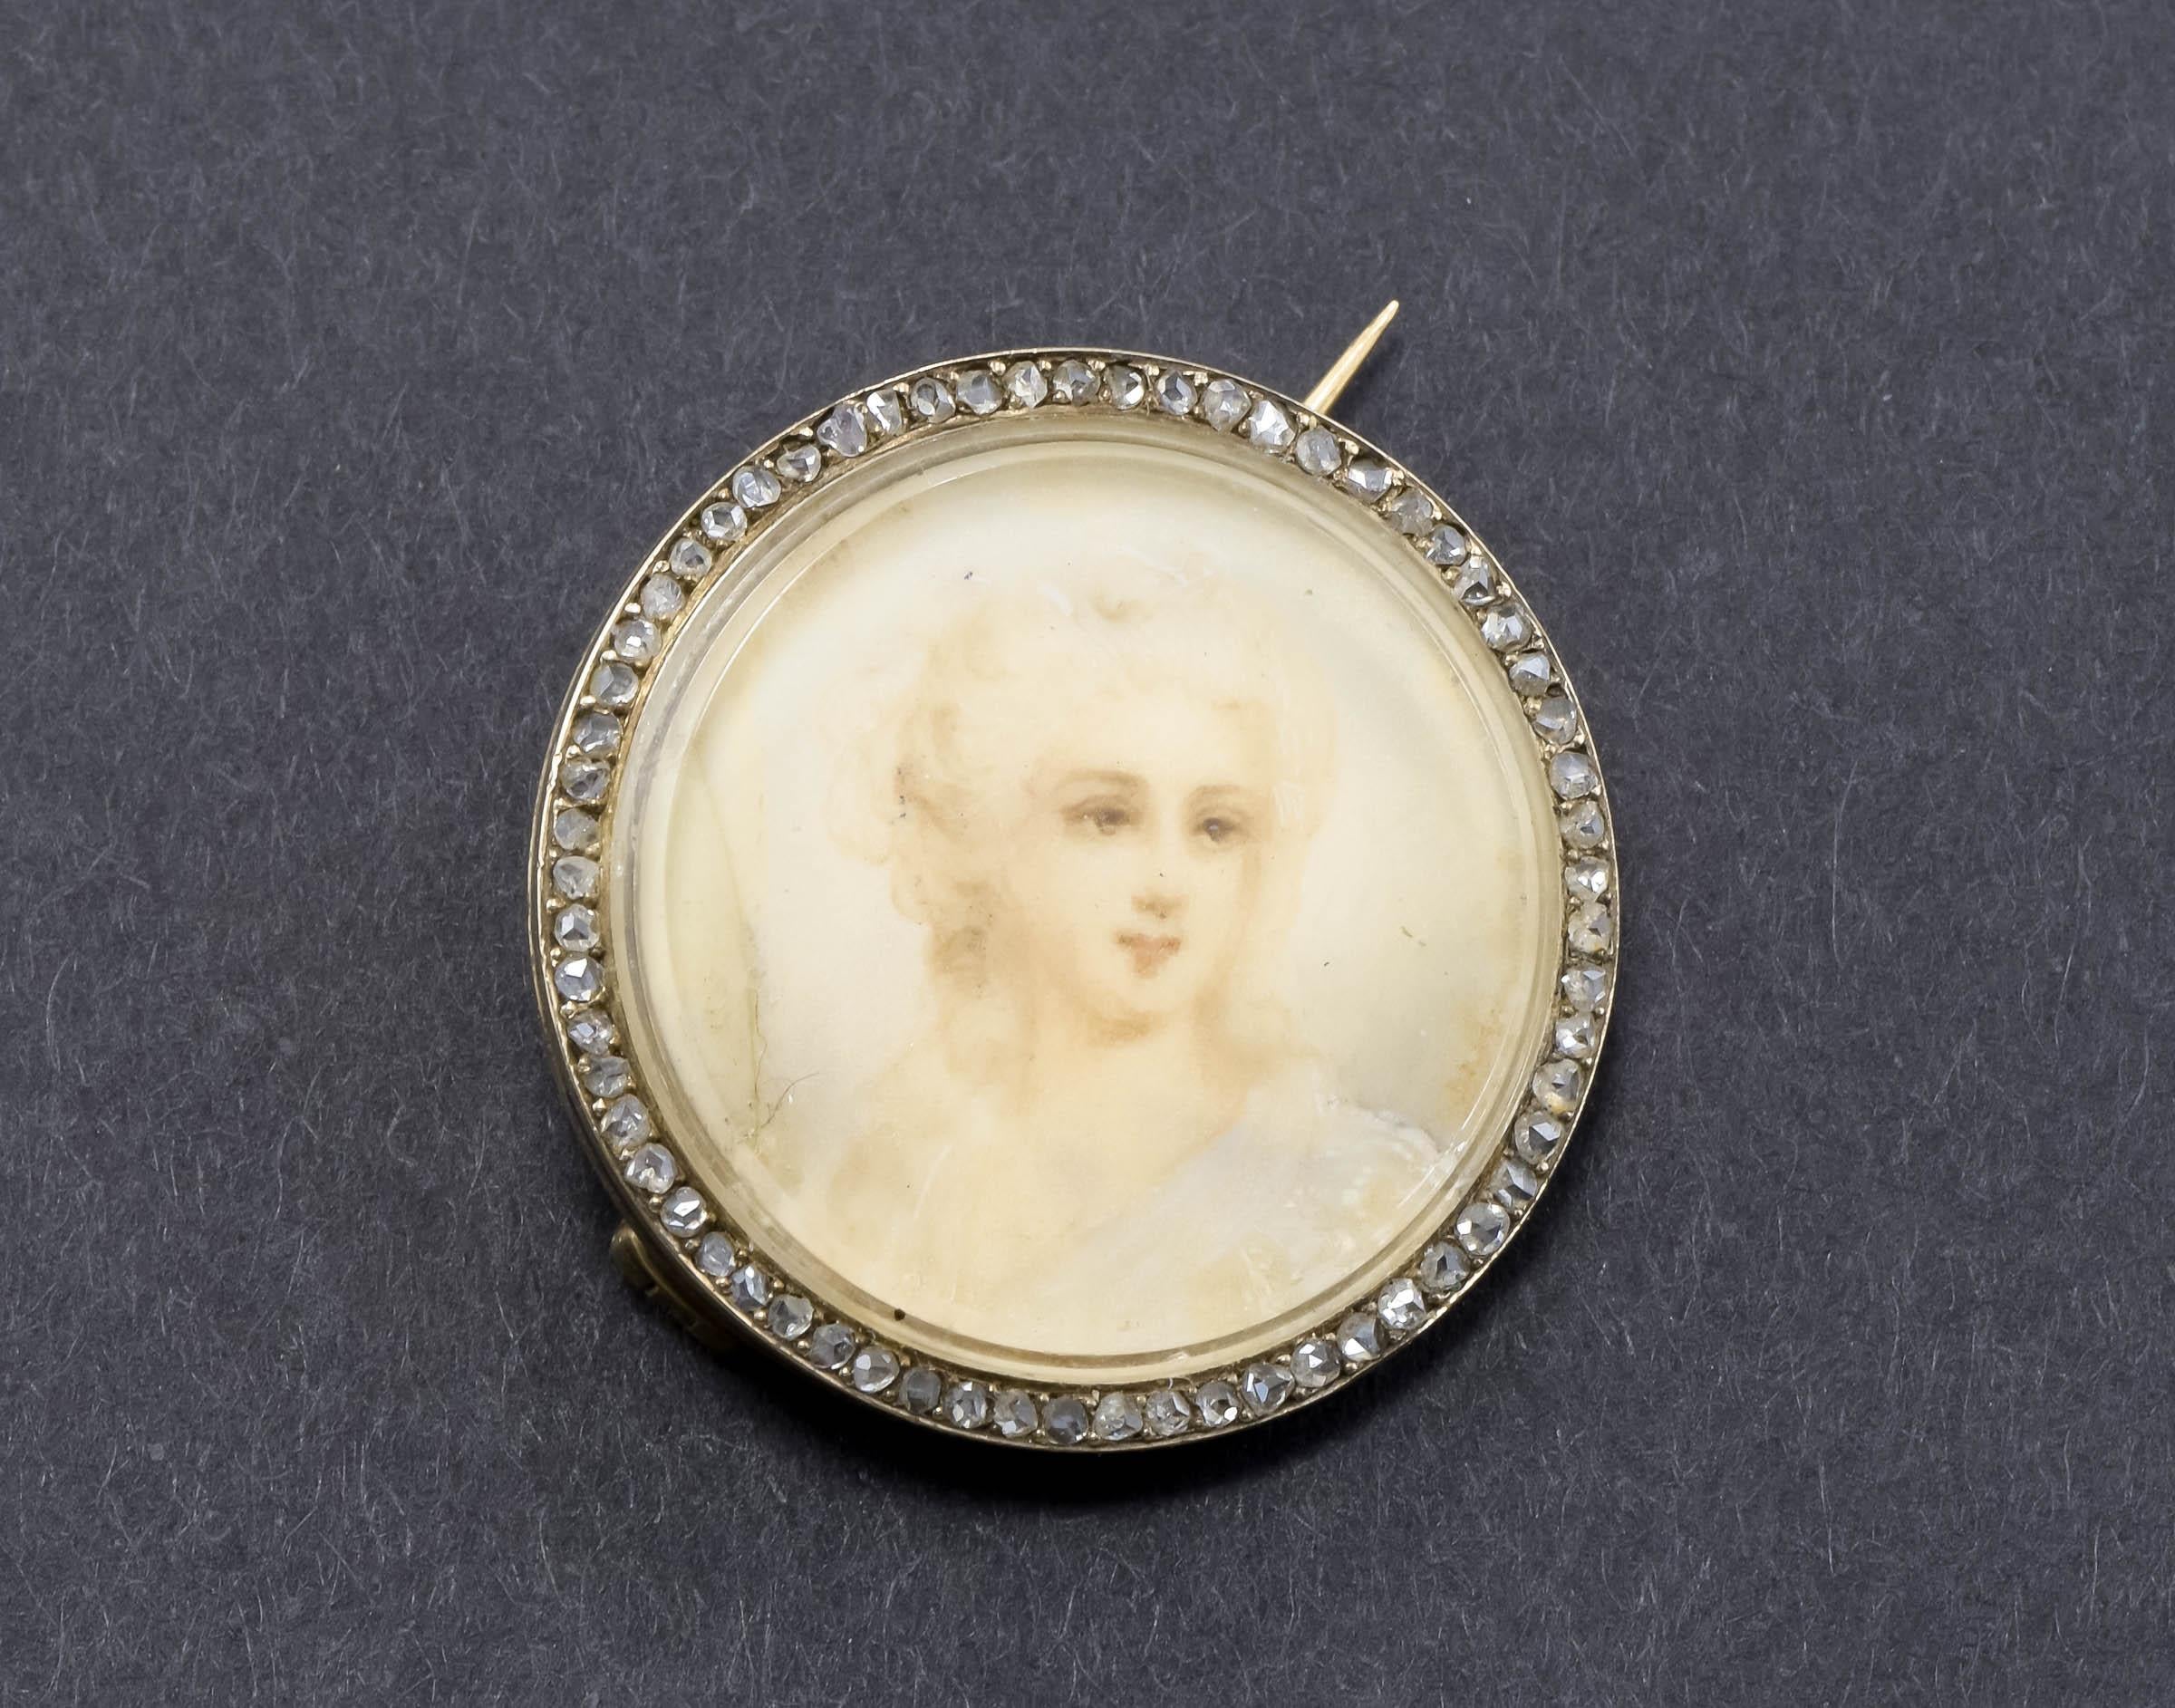 I'm delighted to offer a very lovely antique portrait miniature brooch, surrounded by glittering rose cut diamonds.

Crafted of gold testing around 15K, the round brooch features a hand painted portrait of a Georgian woman with kind brown eyes